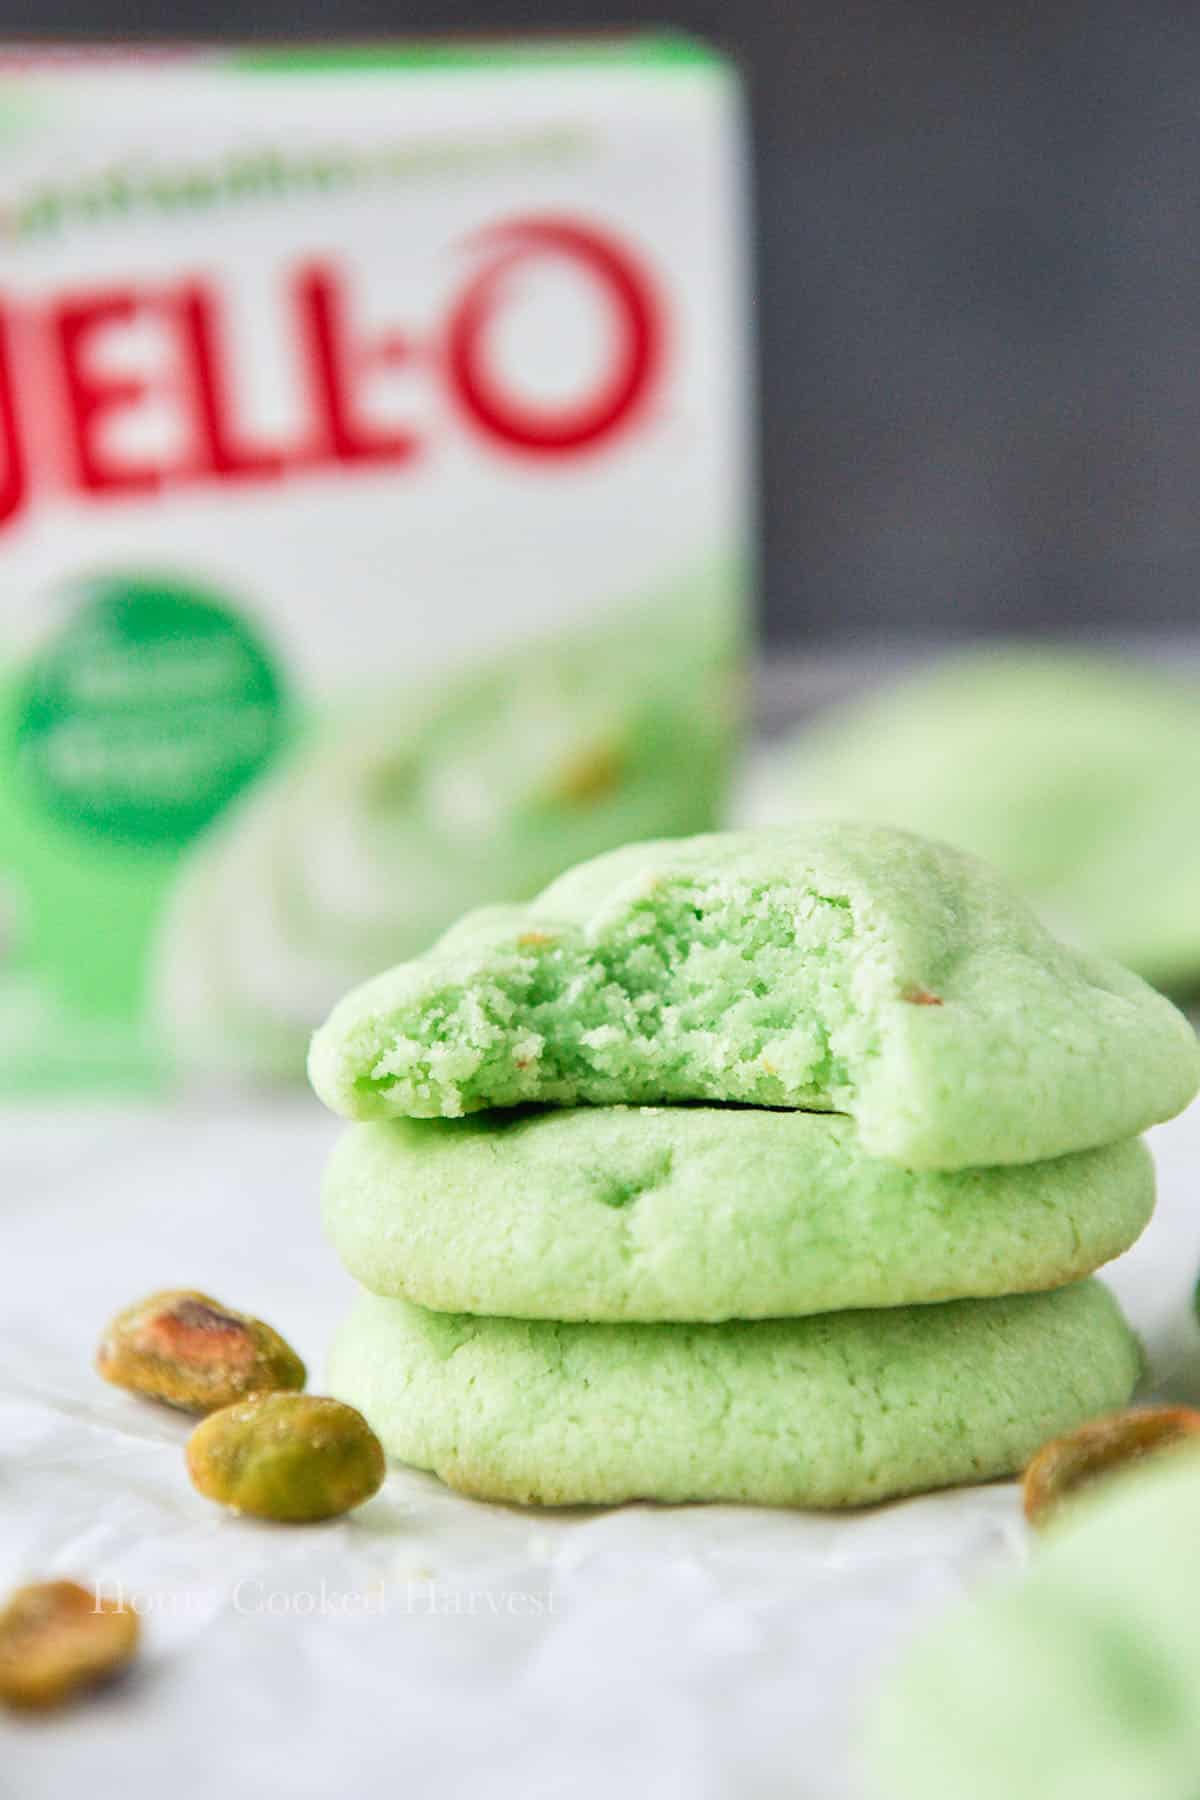 A small stack of cookies with the top one missing a bite and a box of jello pudding in the background.